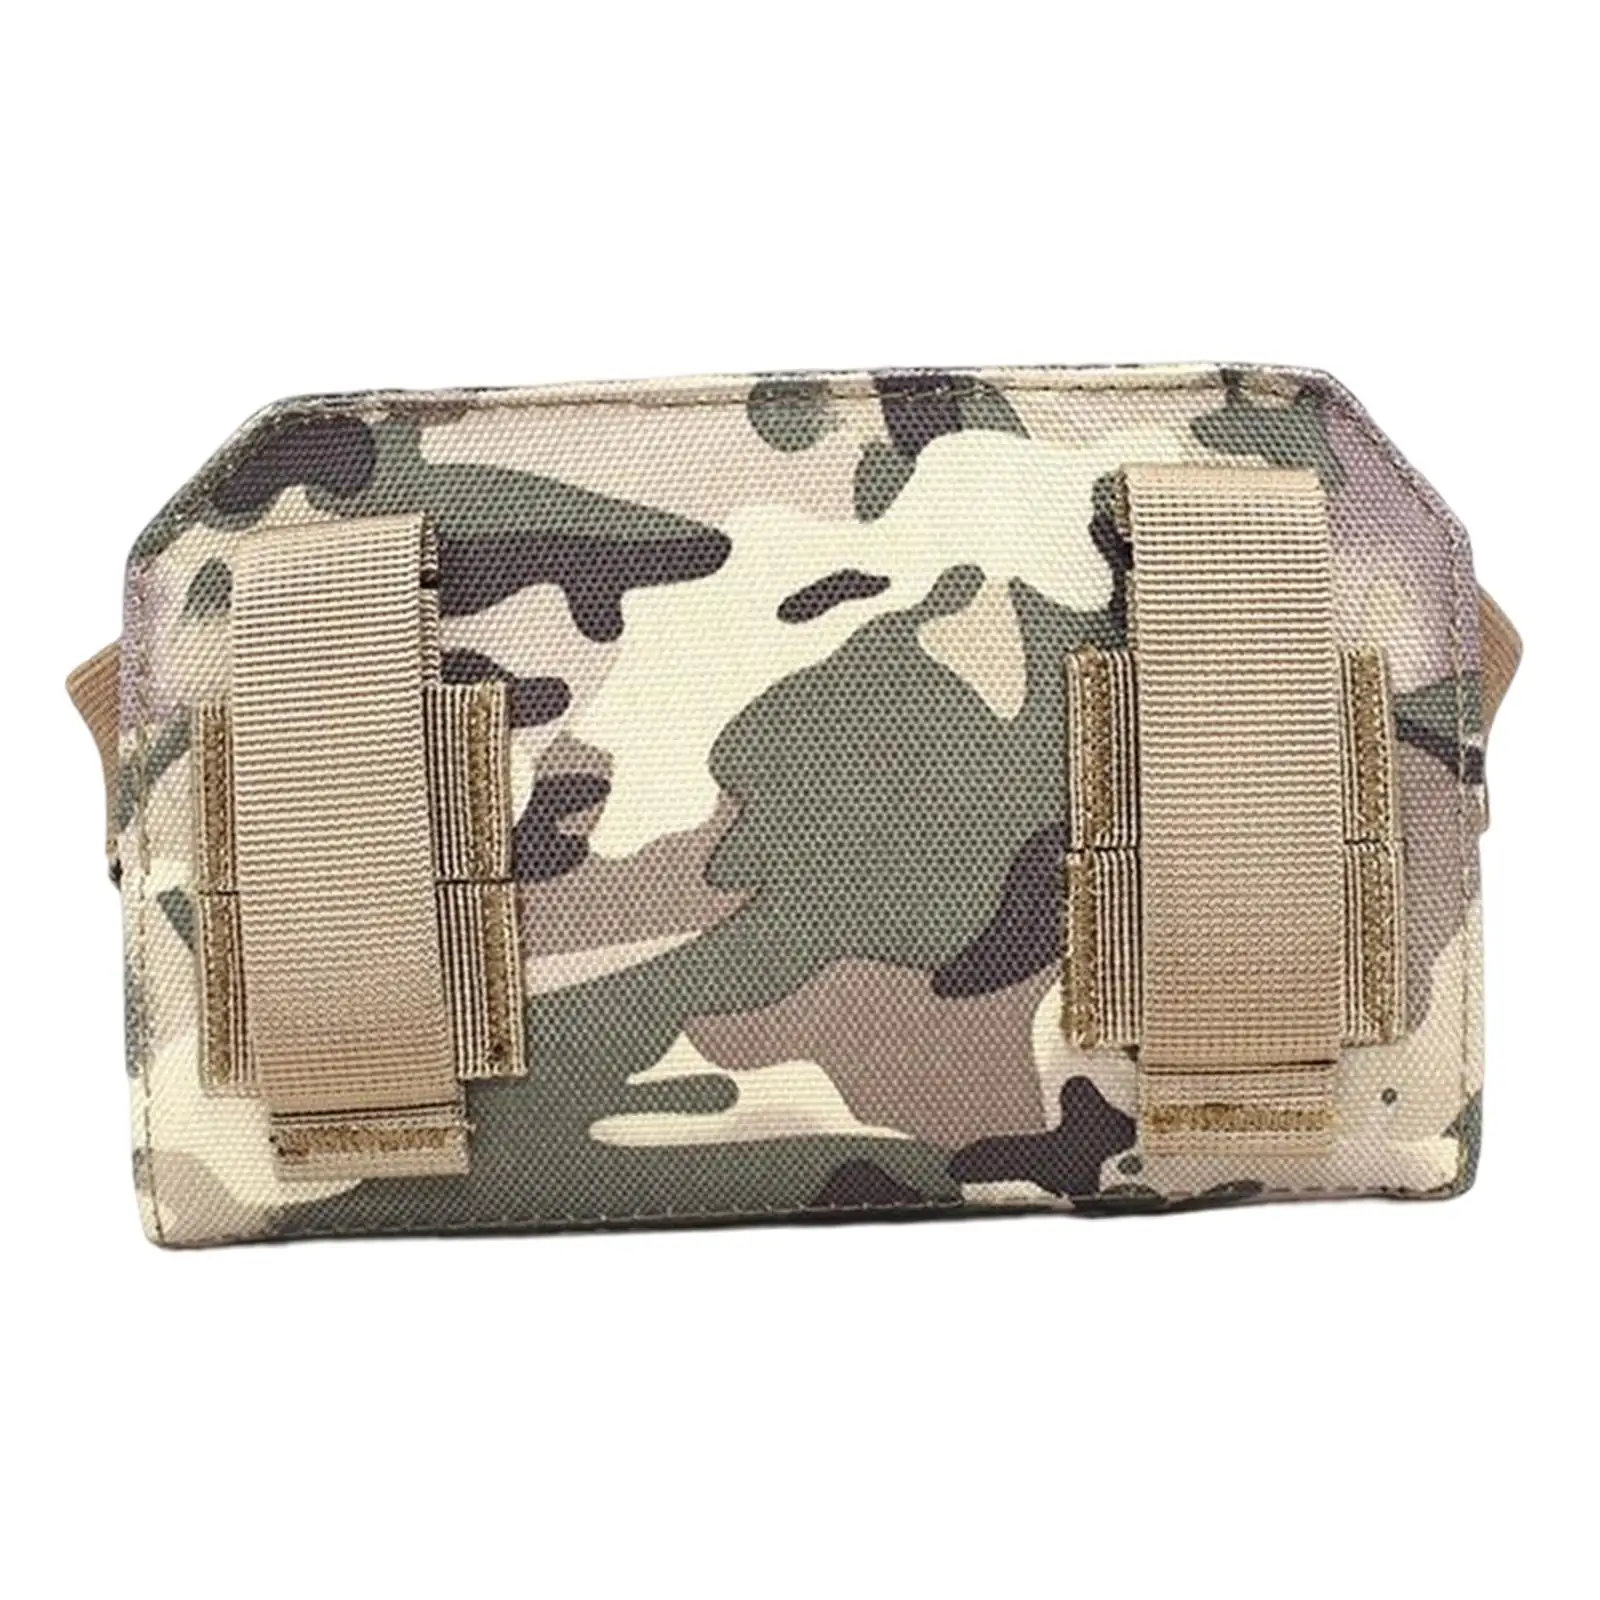  Map Bag Organizer Pocket Pouch Mobile Phone  Durable Admin Pouch for Hunting Shooting Hiking